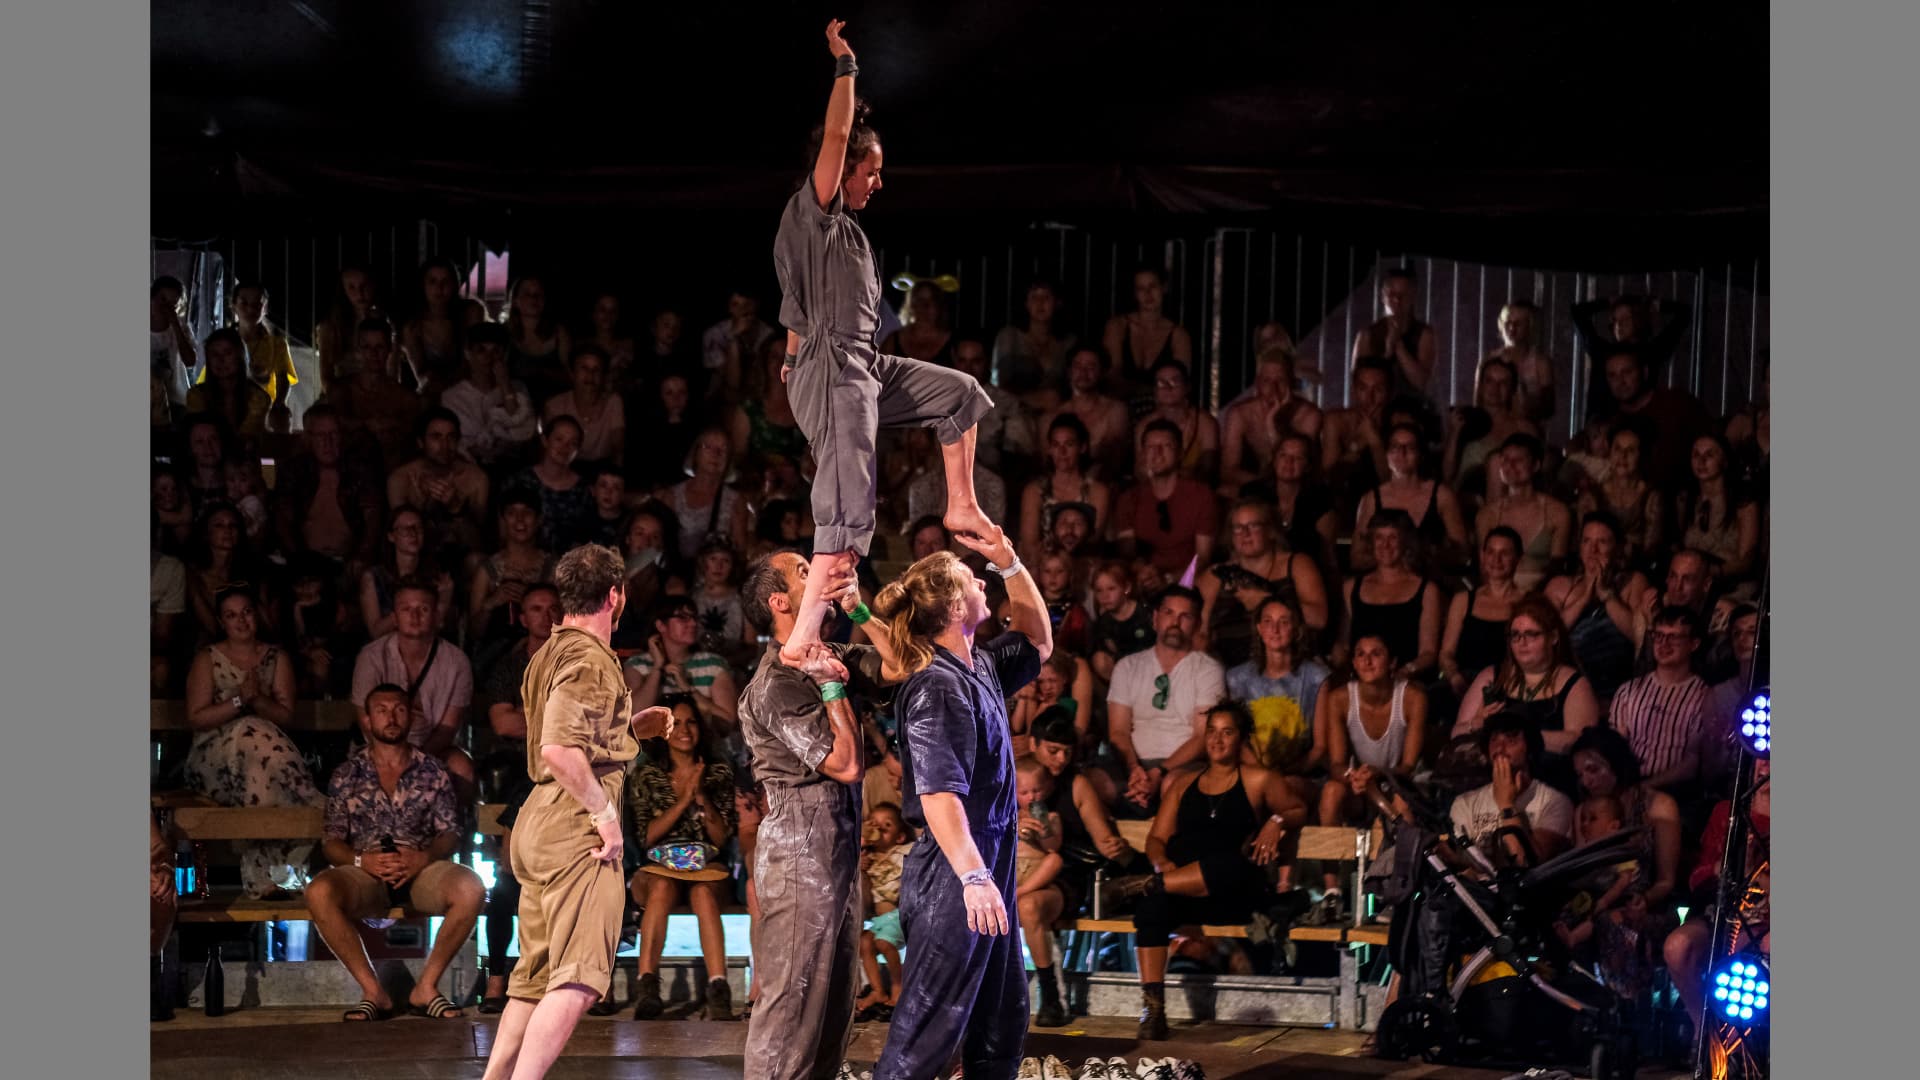 A performer climbs up the bodies of his fellow cast members as if he were walking up a flight of stairs